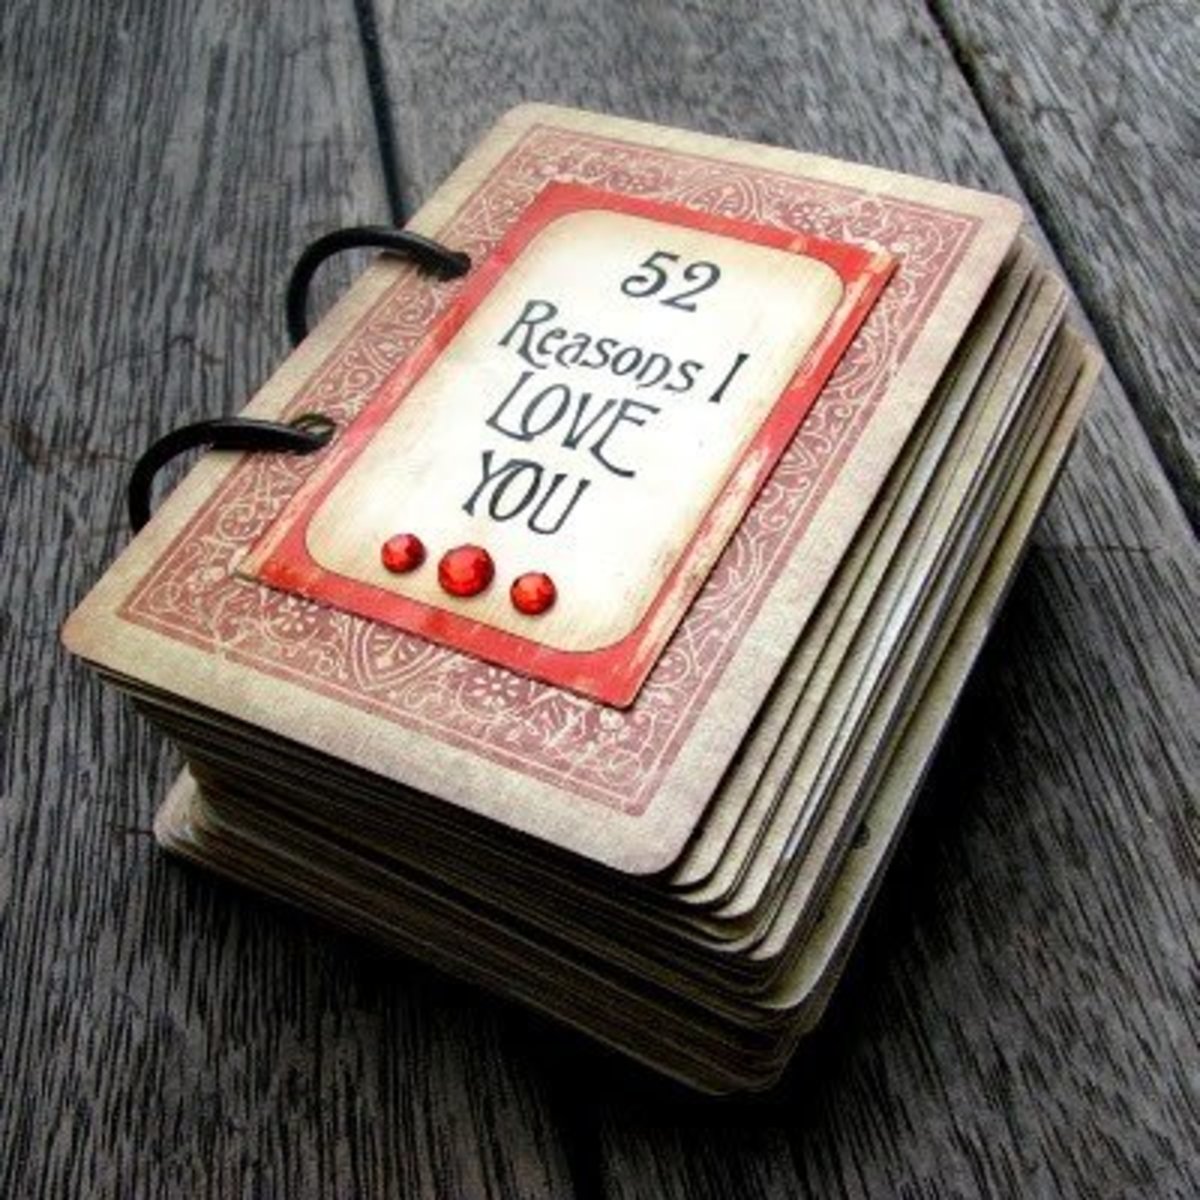 Create a scrapbook of reasons you love your significant other.